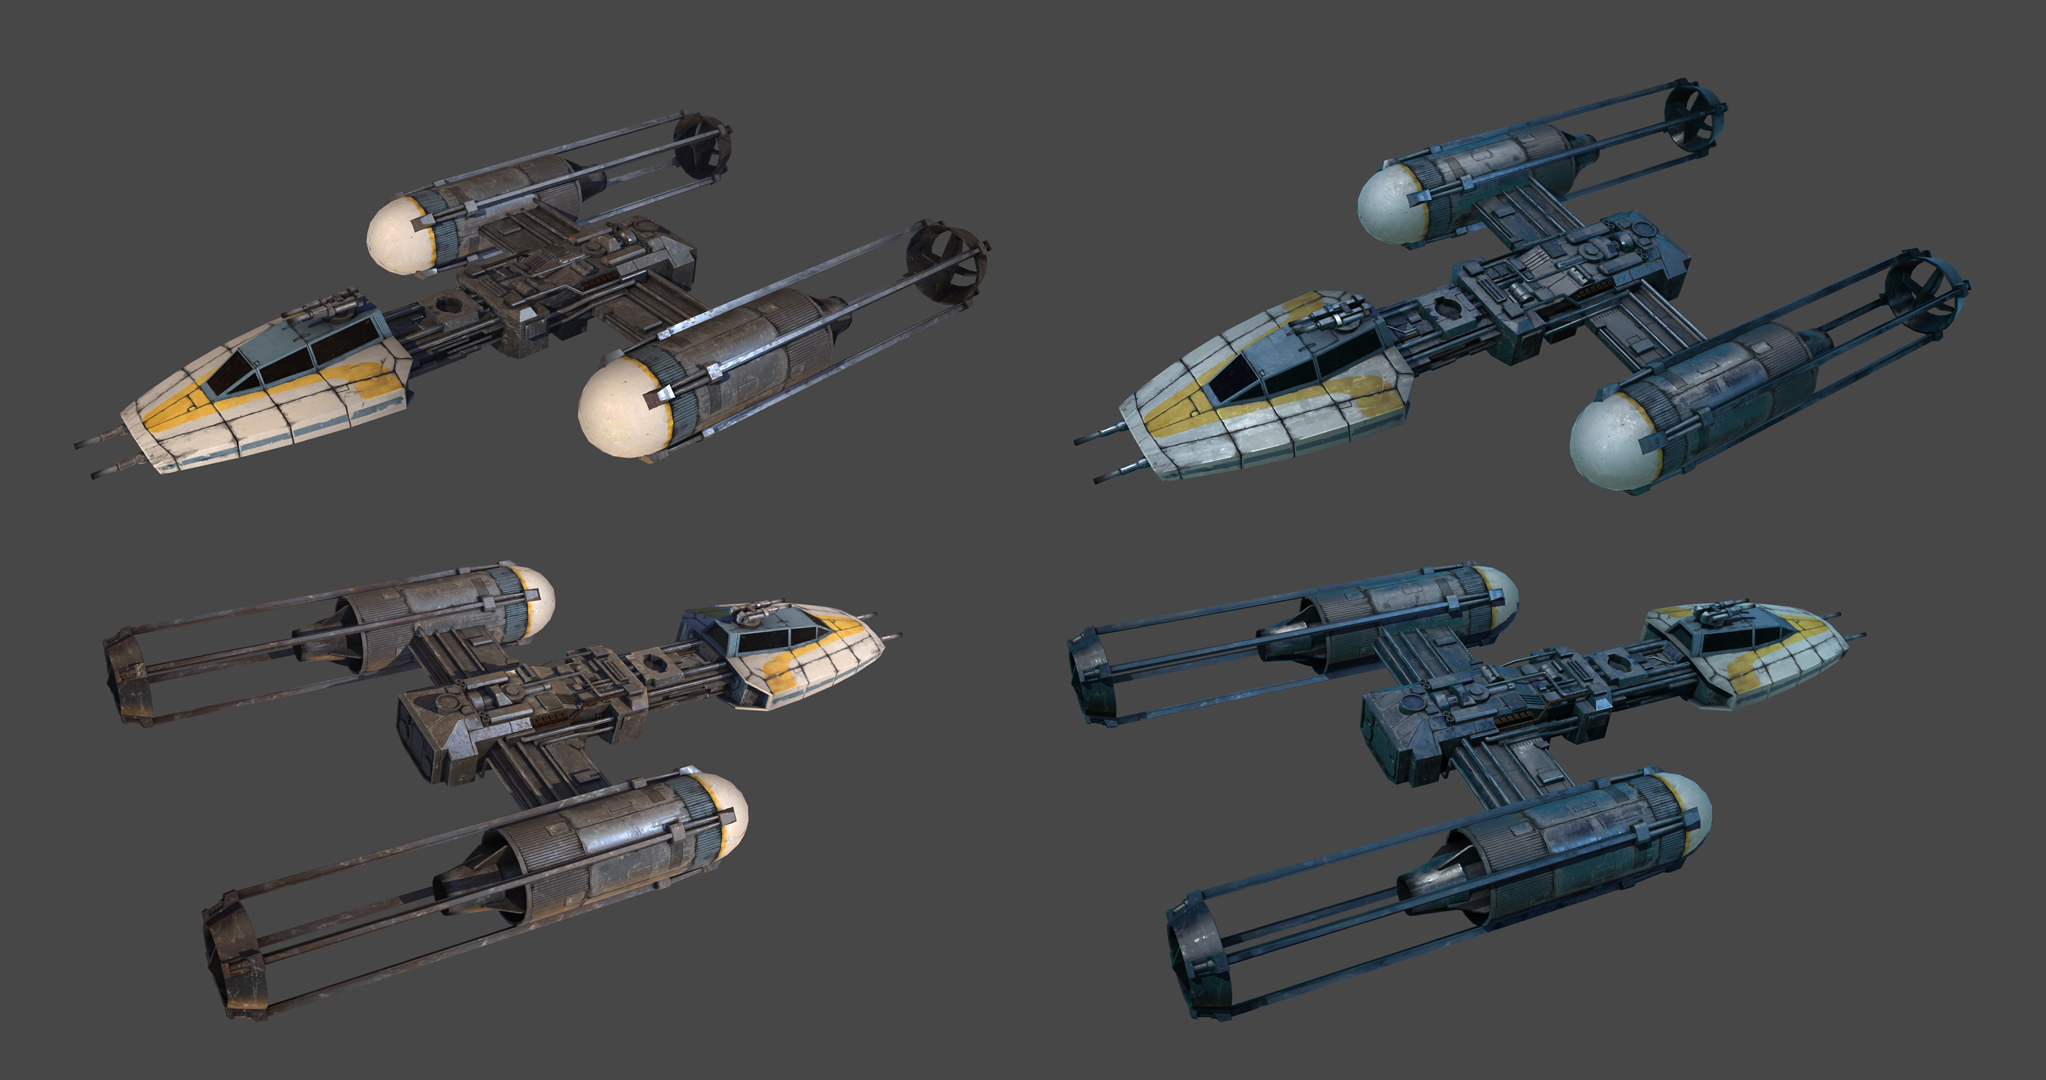  One of the first pieces I made for the project: a Y-Wing that had seen better days. This was used to develop the shaders and pipeline for the project. Shown in two examples of our environmental lighting. 